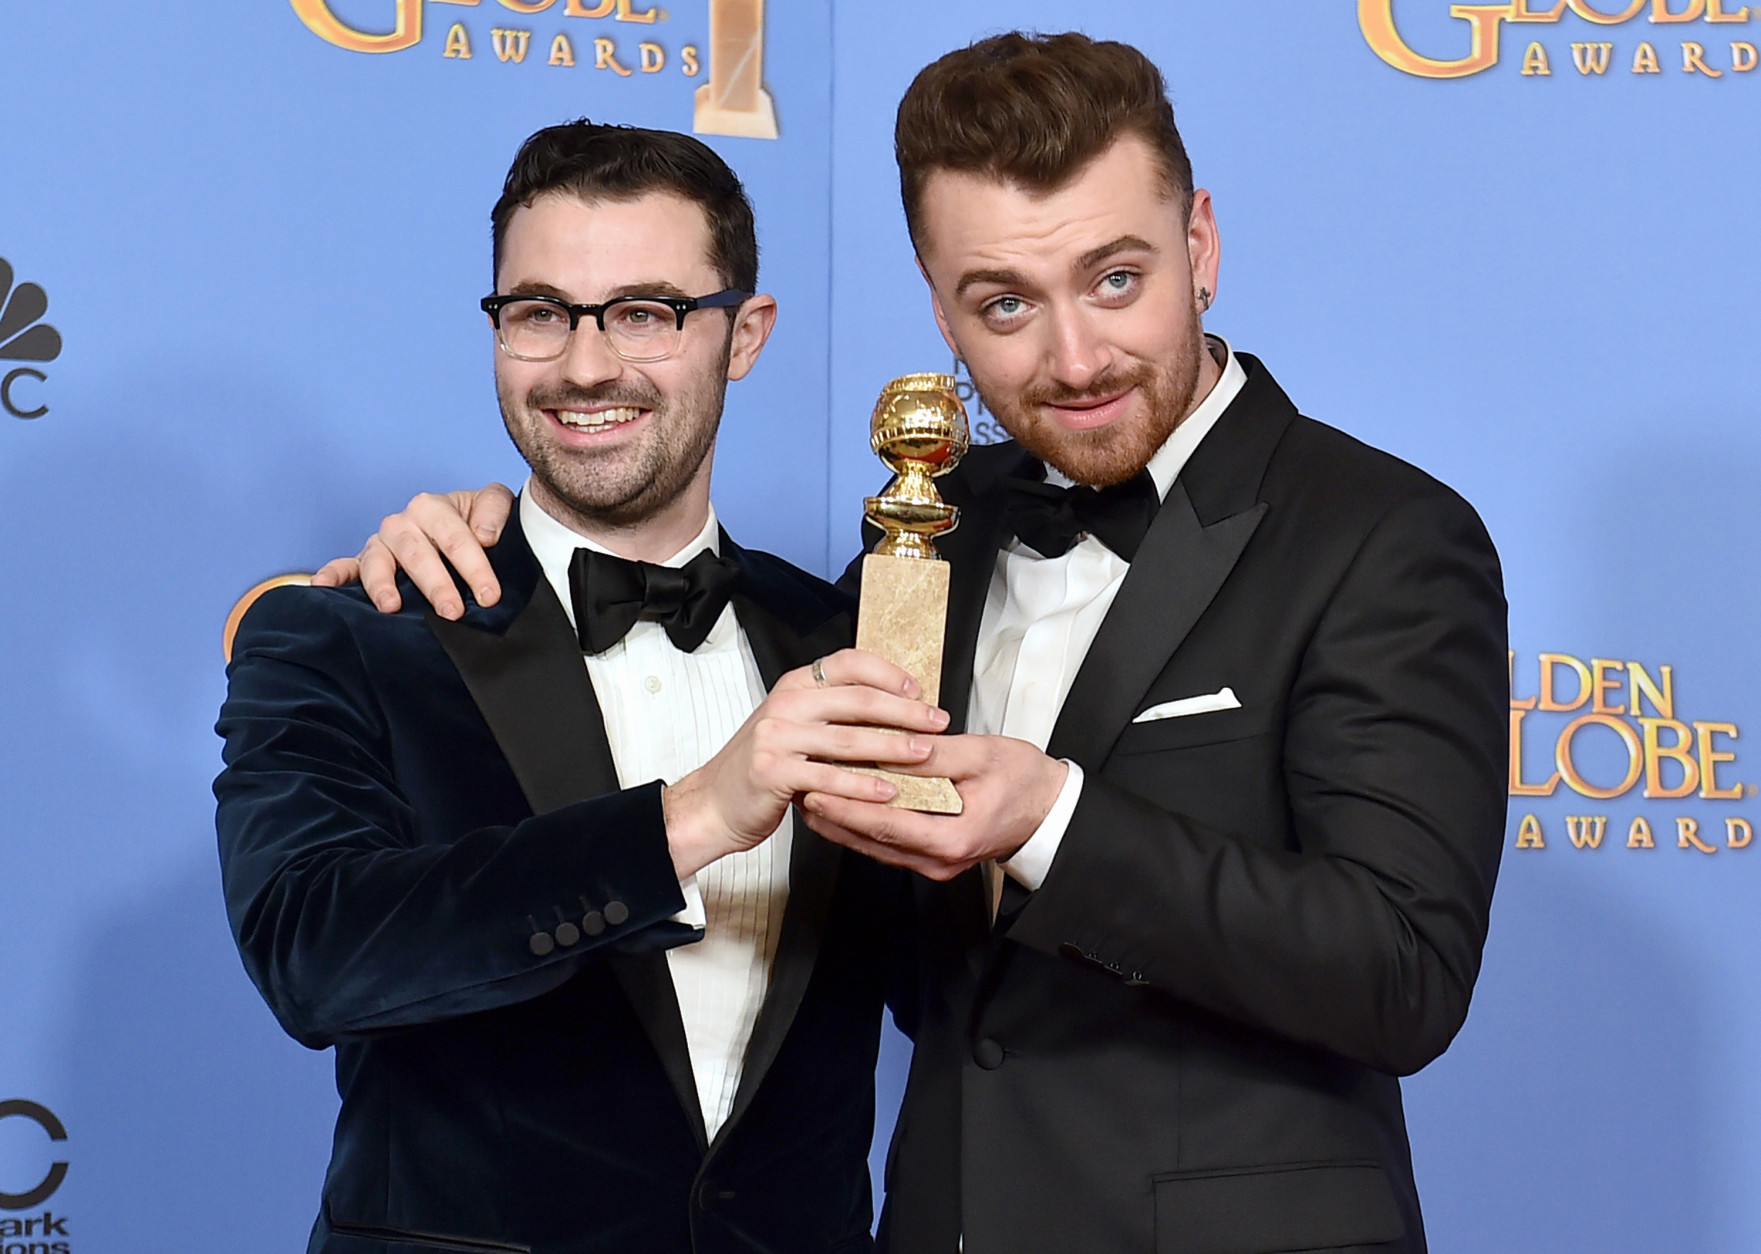 Jimmy Napes, left, and Sam Smith pose in the press room with the award for best original song in a motion picture for Writings on the Wall from Spectre" at the 73rd annual Golden Globe Awards on Sunday, Jan. 10, 2016, at the Beverly Hilton Hotel in Beverly Hills, Calif. (Photo by Jordan Strauss/Invision/AP)